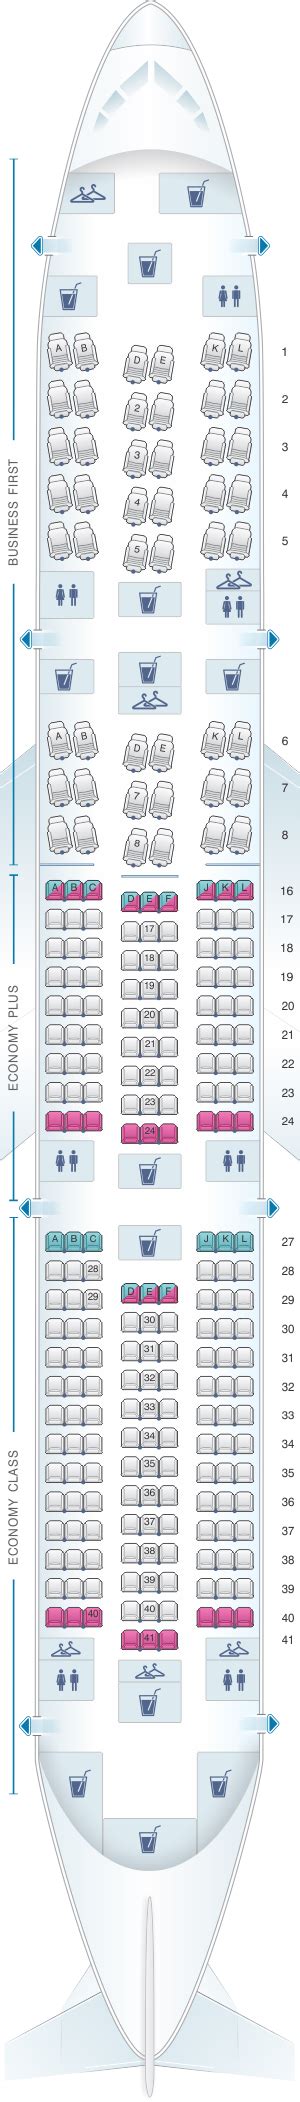 United Boeing 787 Seat Map